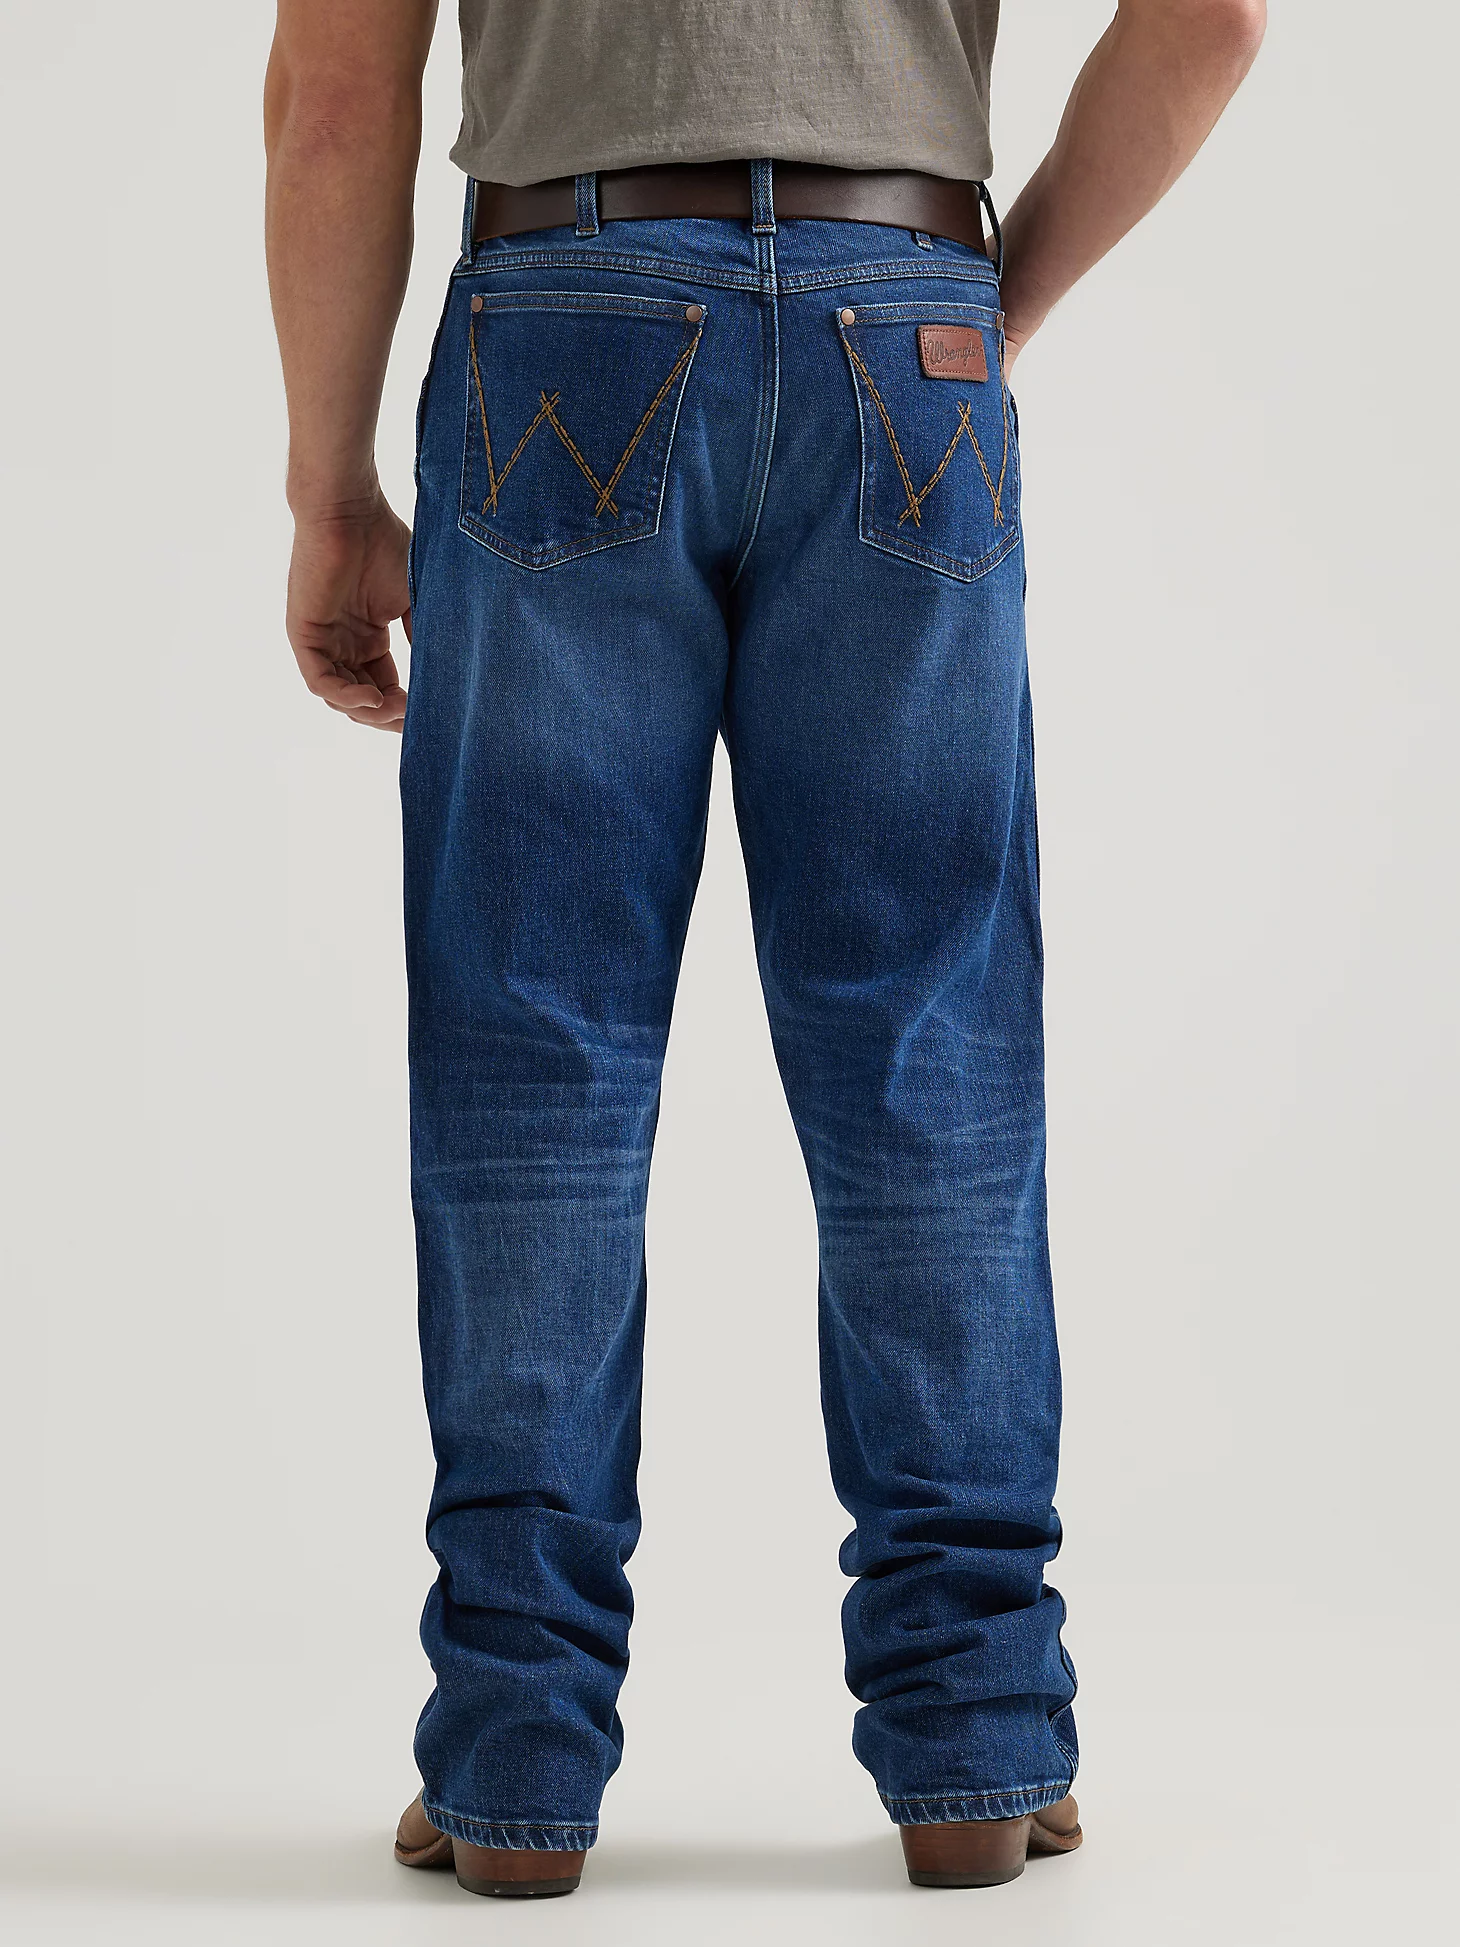 Wrangler relaxed fit bootcut jeans canada